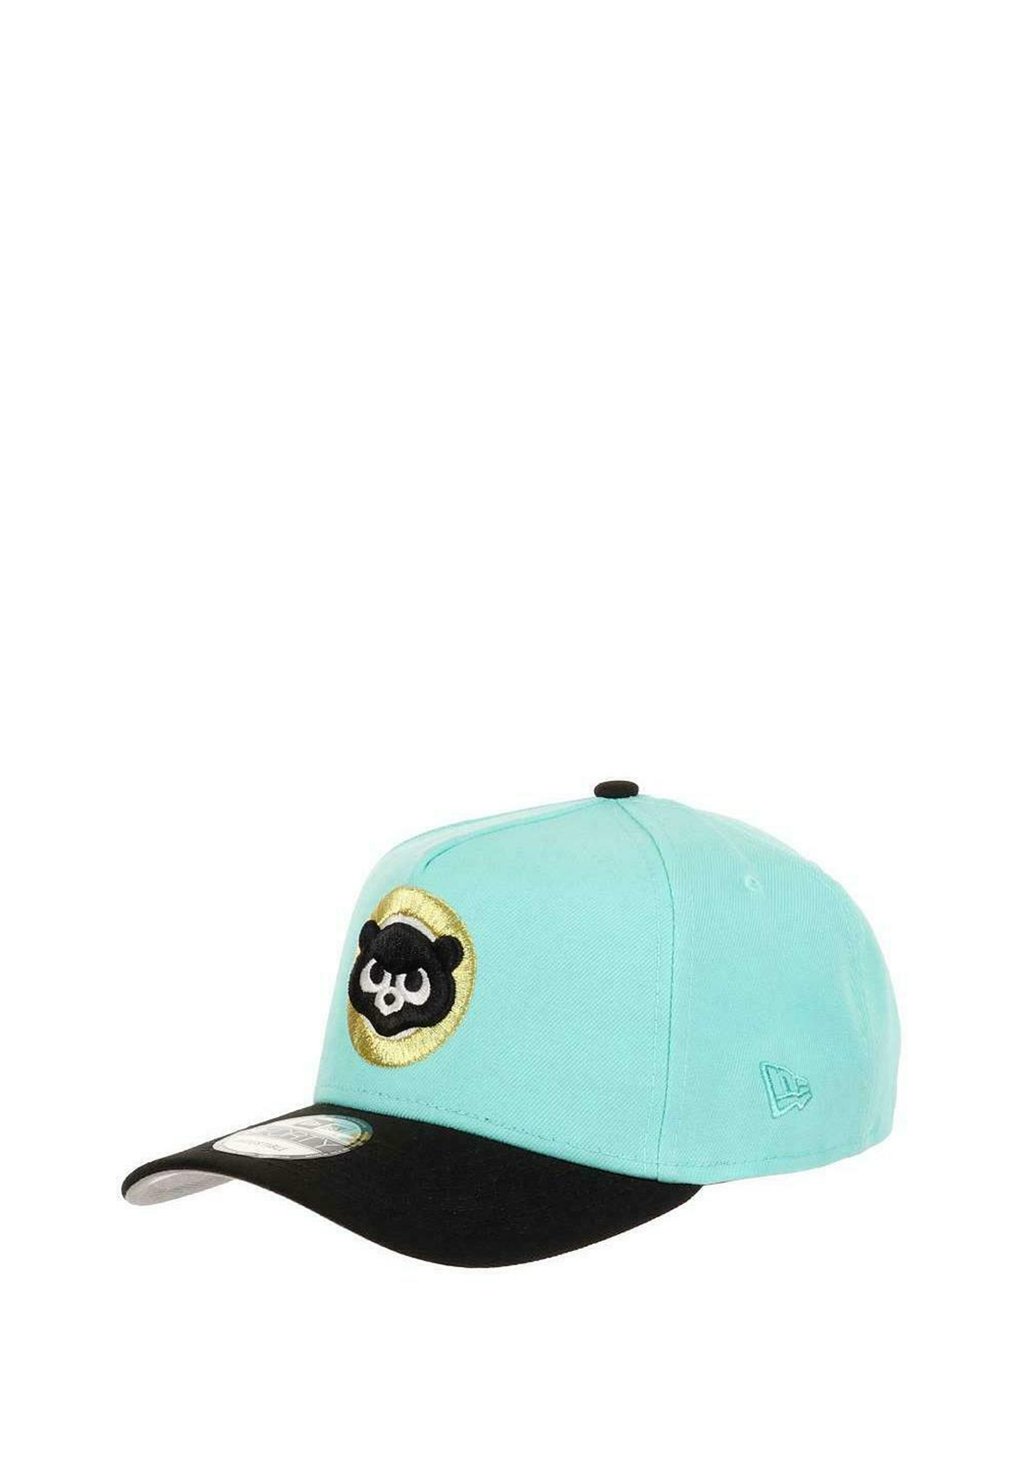 Бейсболка CHICAGO CUBS MLB ALL-STAR GAME 1990 SIDEPATCH COOPERSTOWN 9FORTY A-FRAME SNAPBACK New Era, цвет turquoise